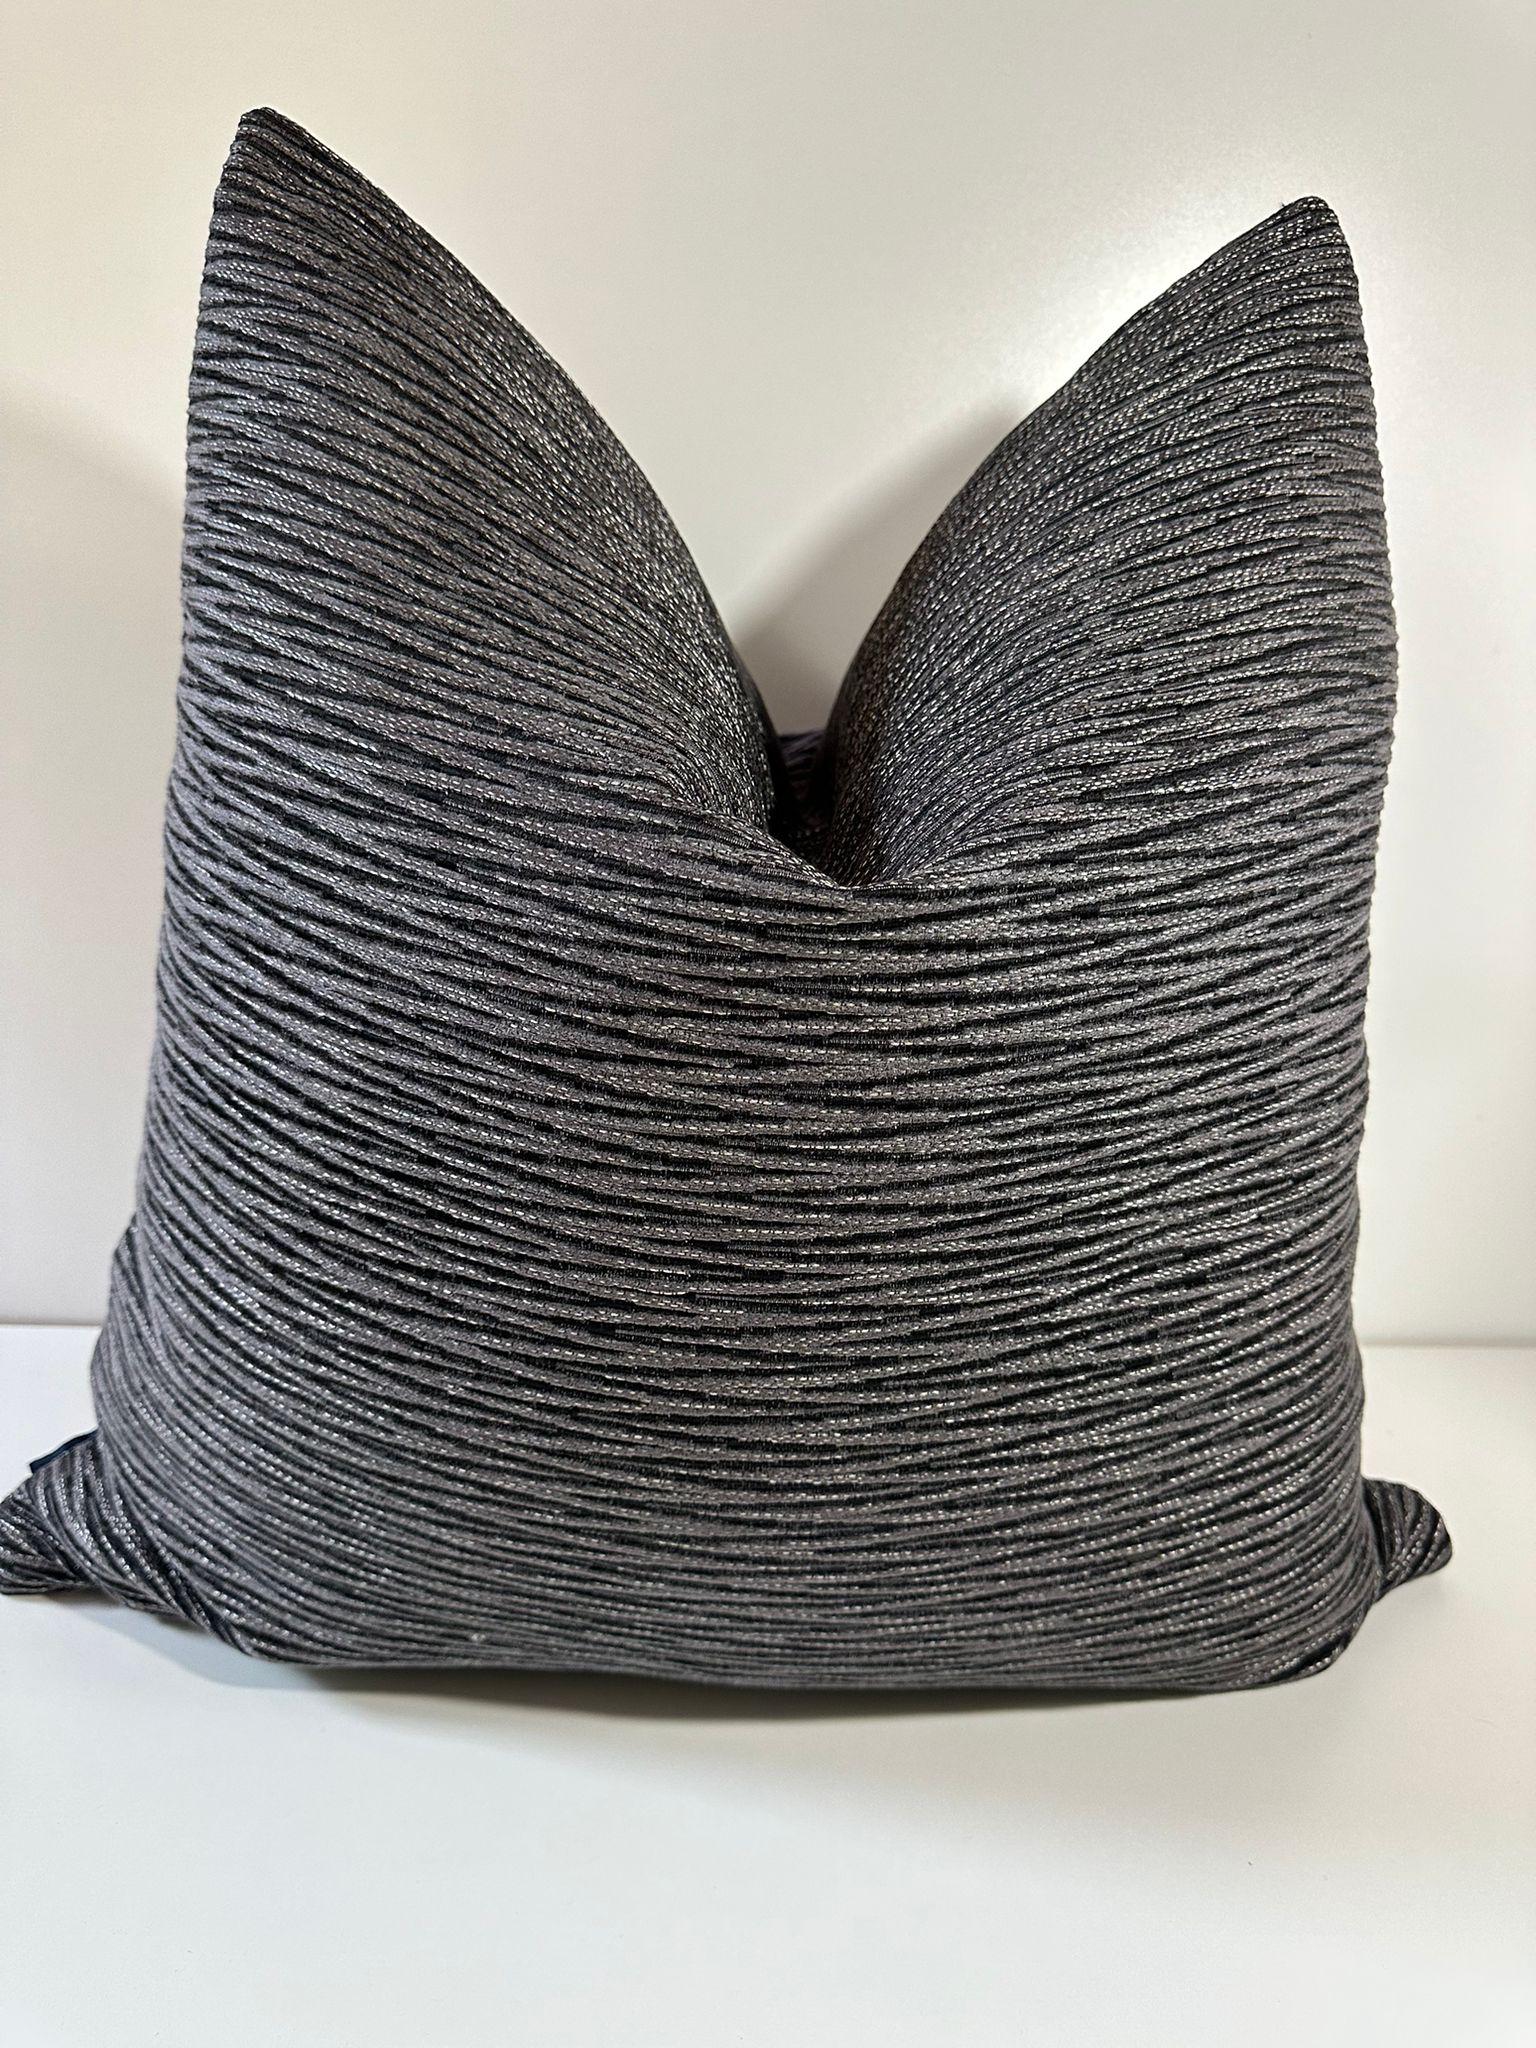 Crafted with imported fabric, this pillow features an exquisite chevron pattern that effortlessly blends different shades of black and gray, creating a stunning visual texture that captivates the eye with a slight metallic glimpse. What sets this